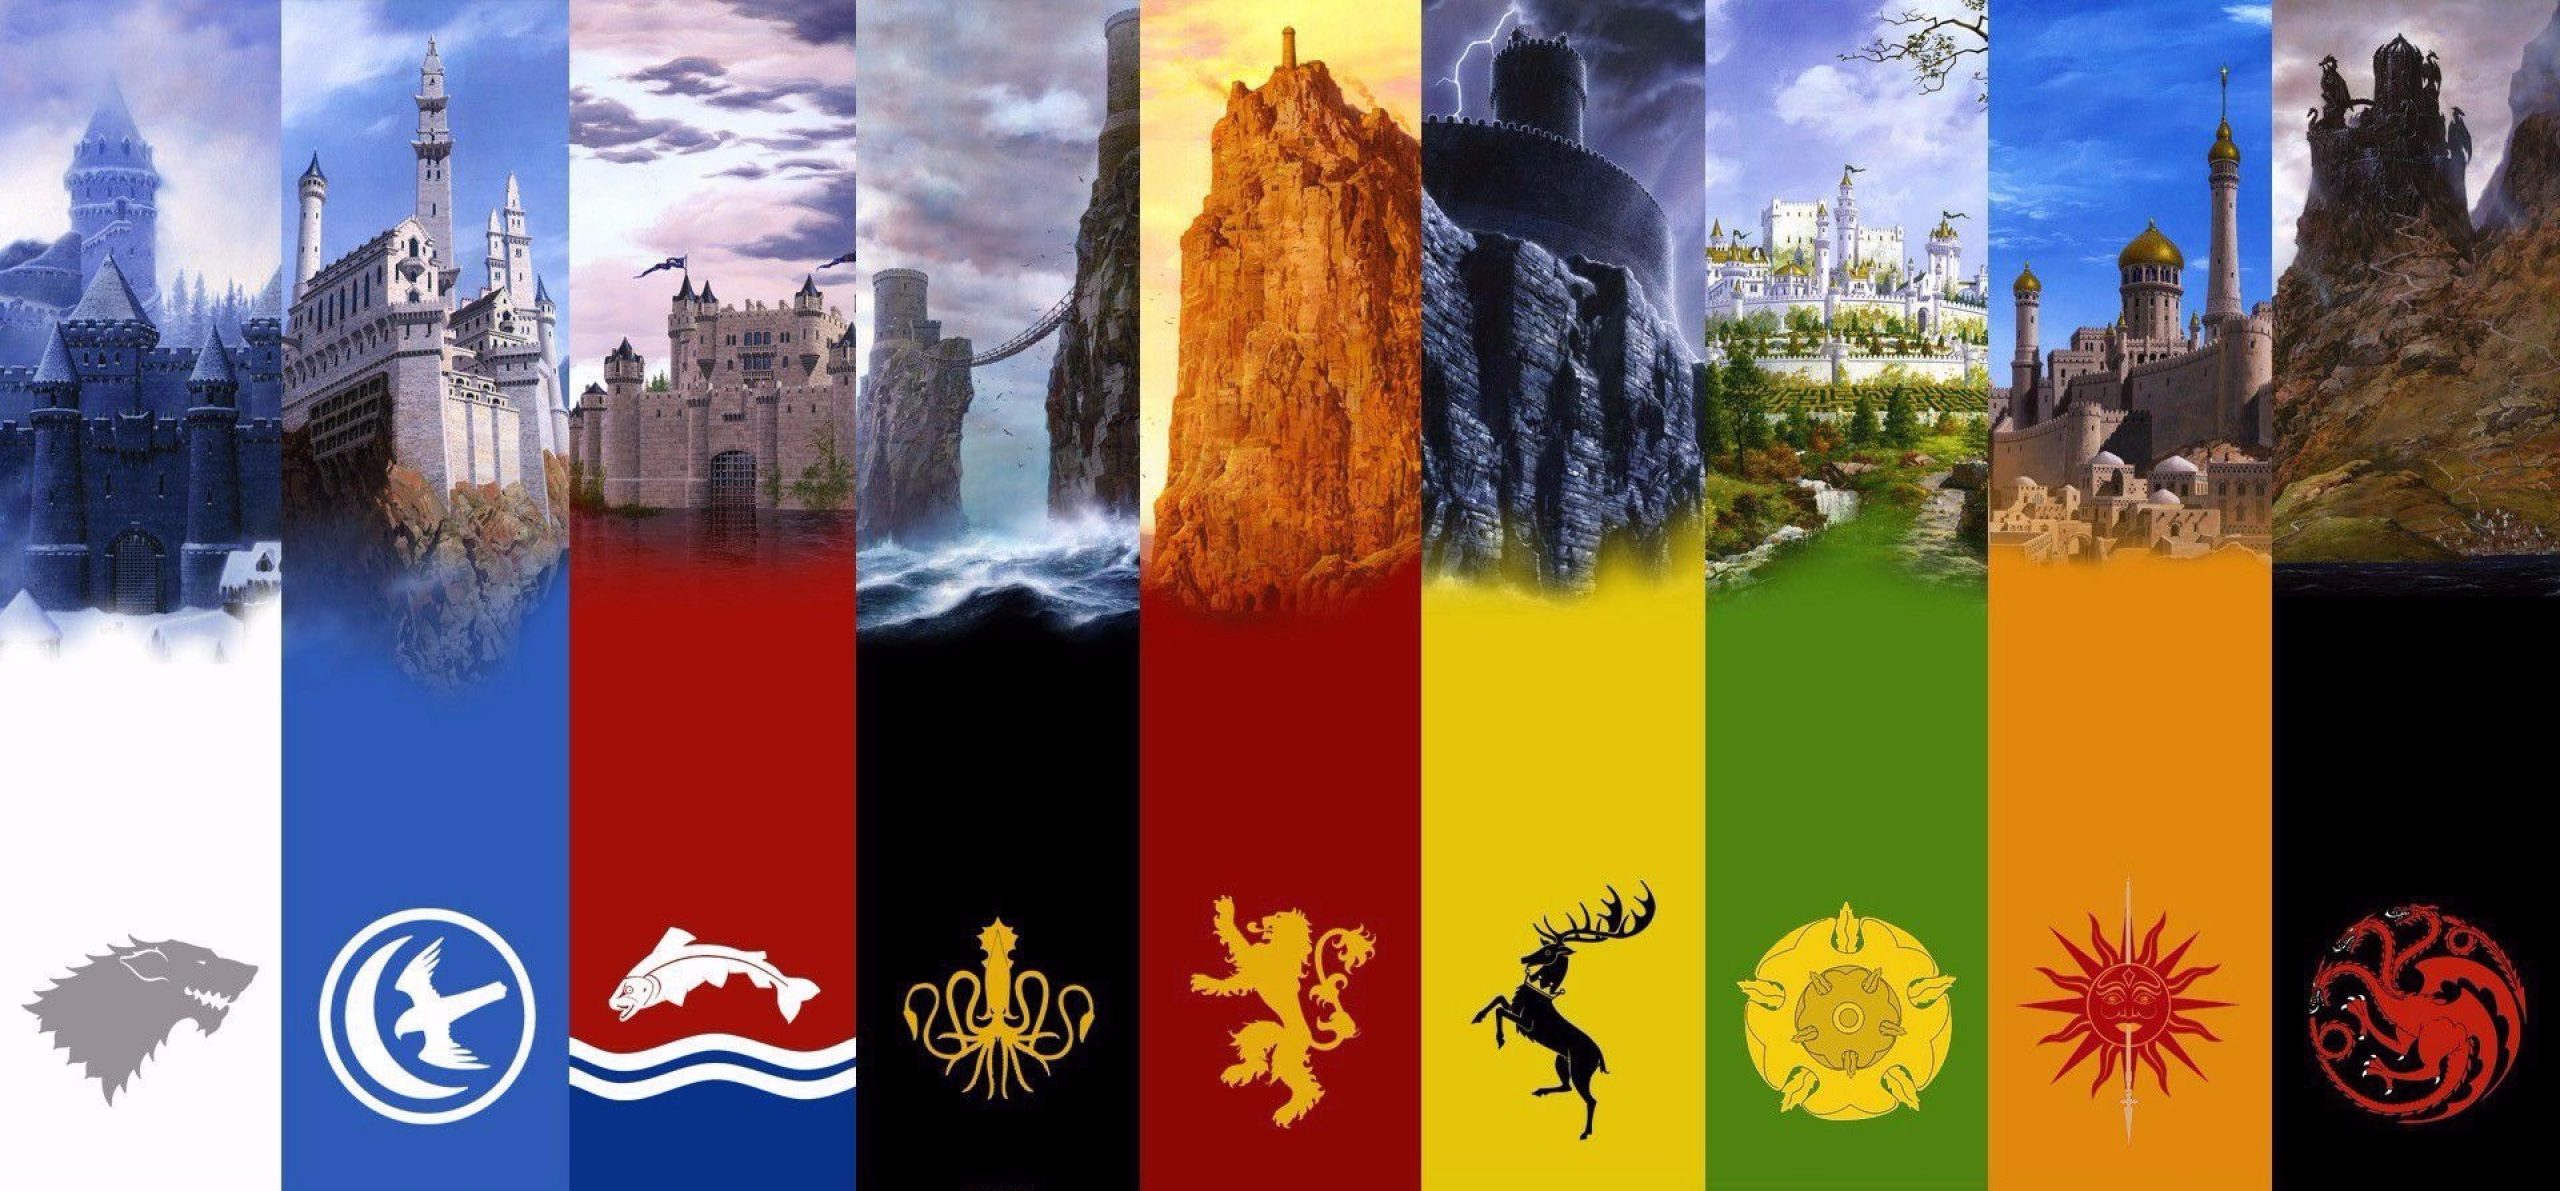 All the different houses of Game of Thrones.